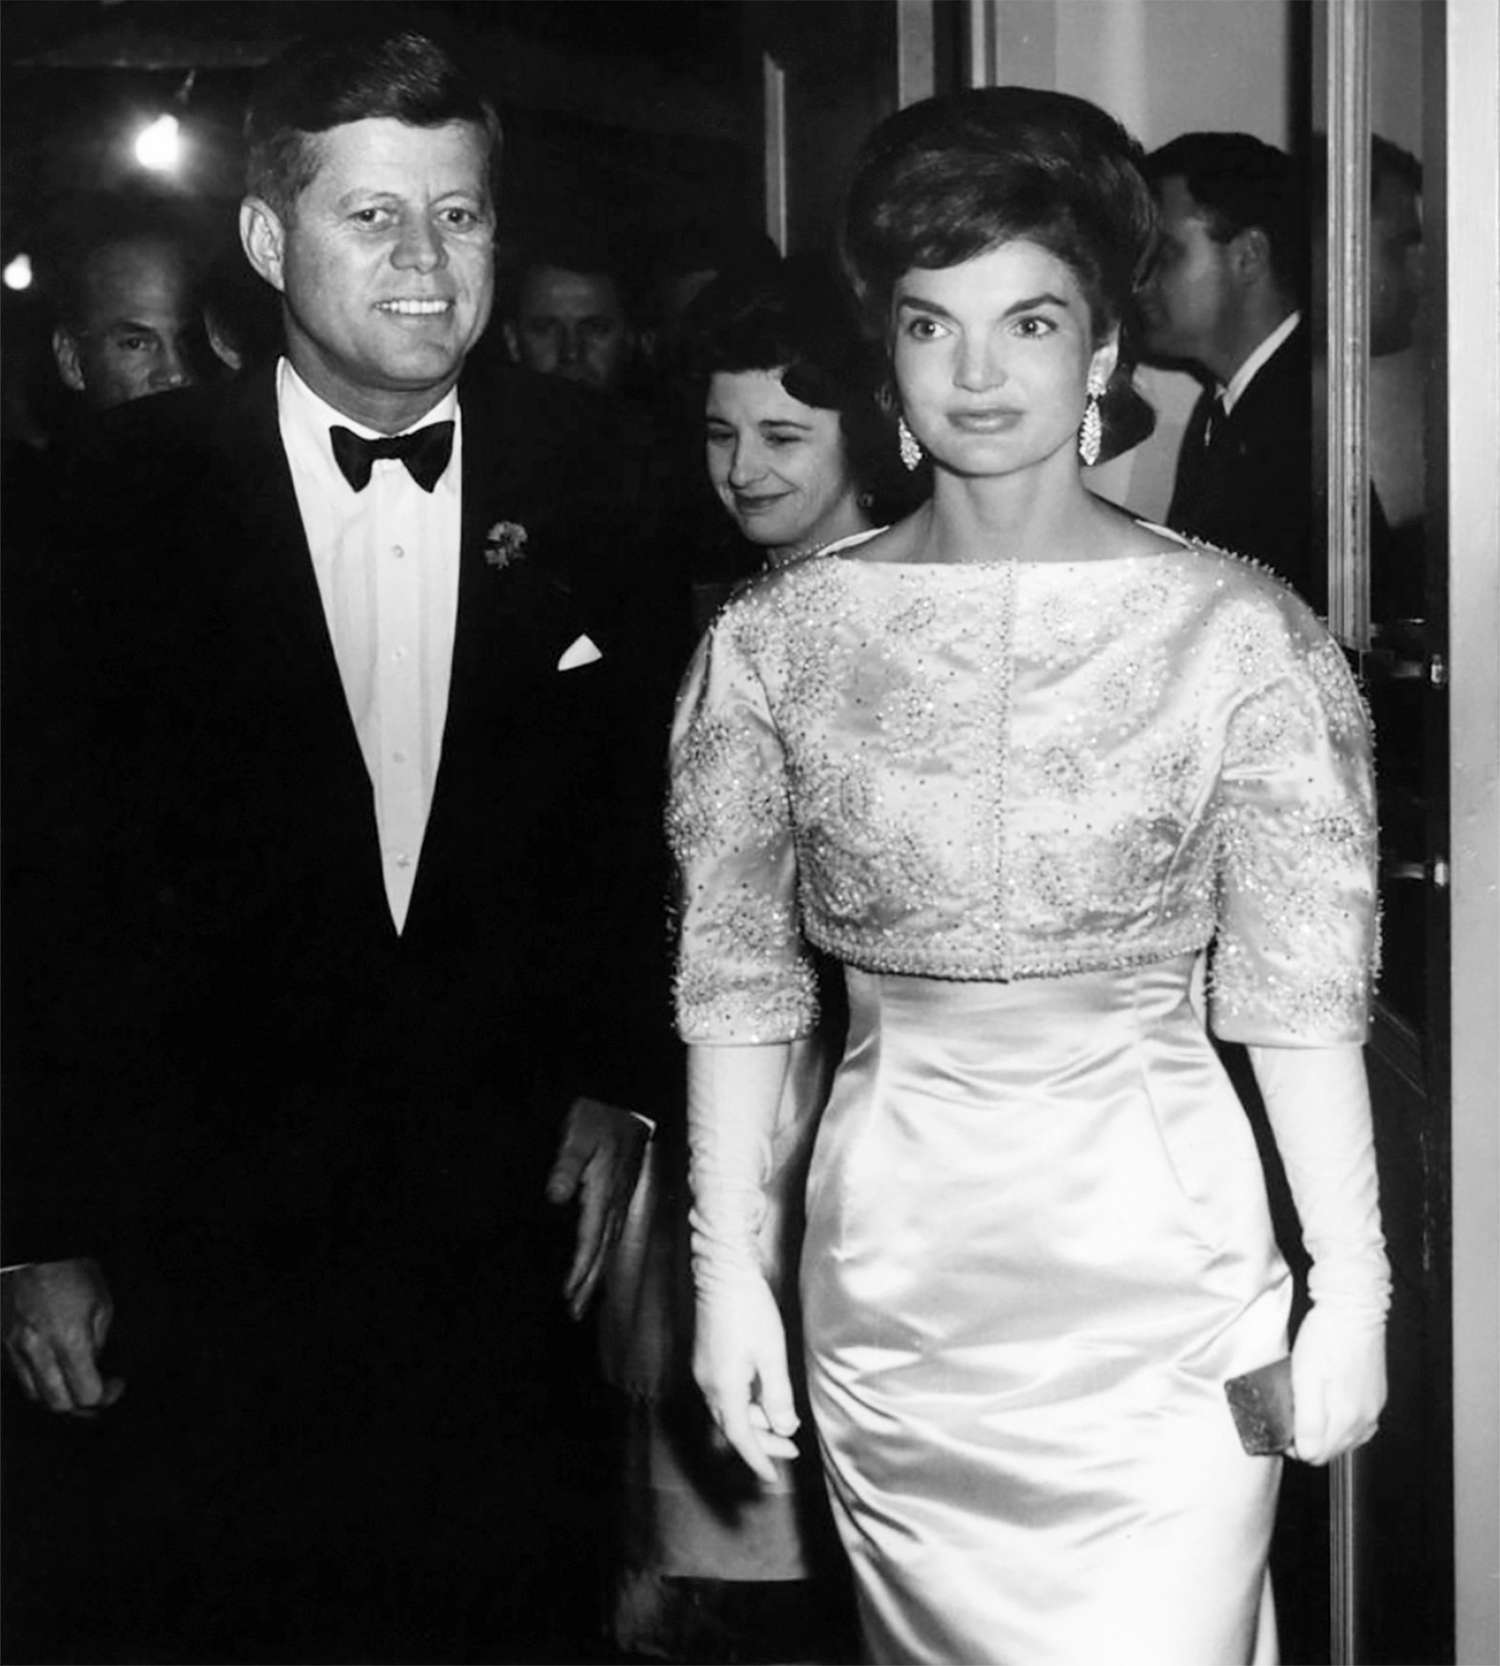 Jackie Kennedy Style, Stars Inspired by Her | PEOPLE.com